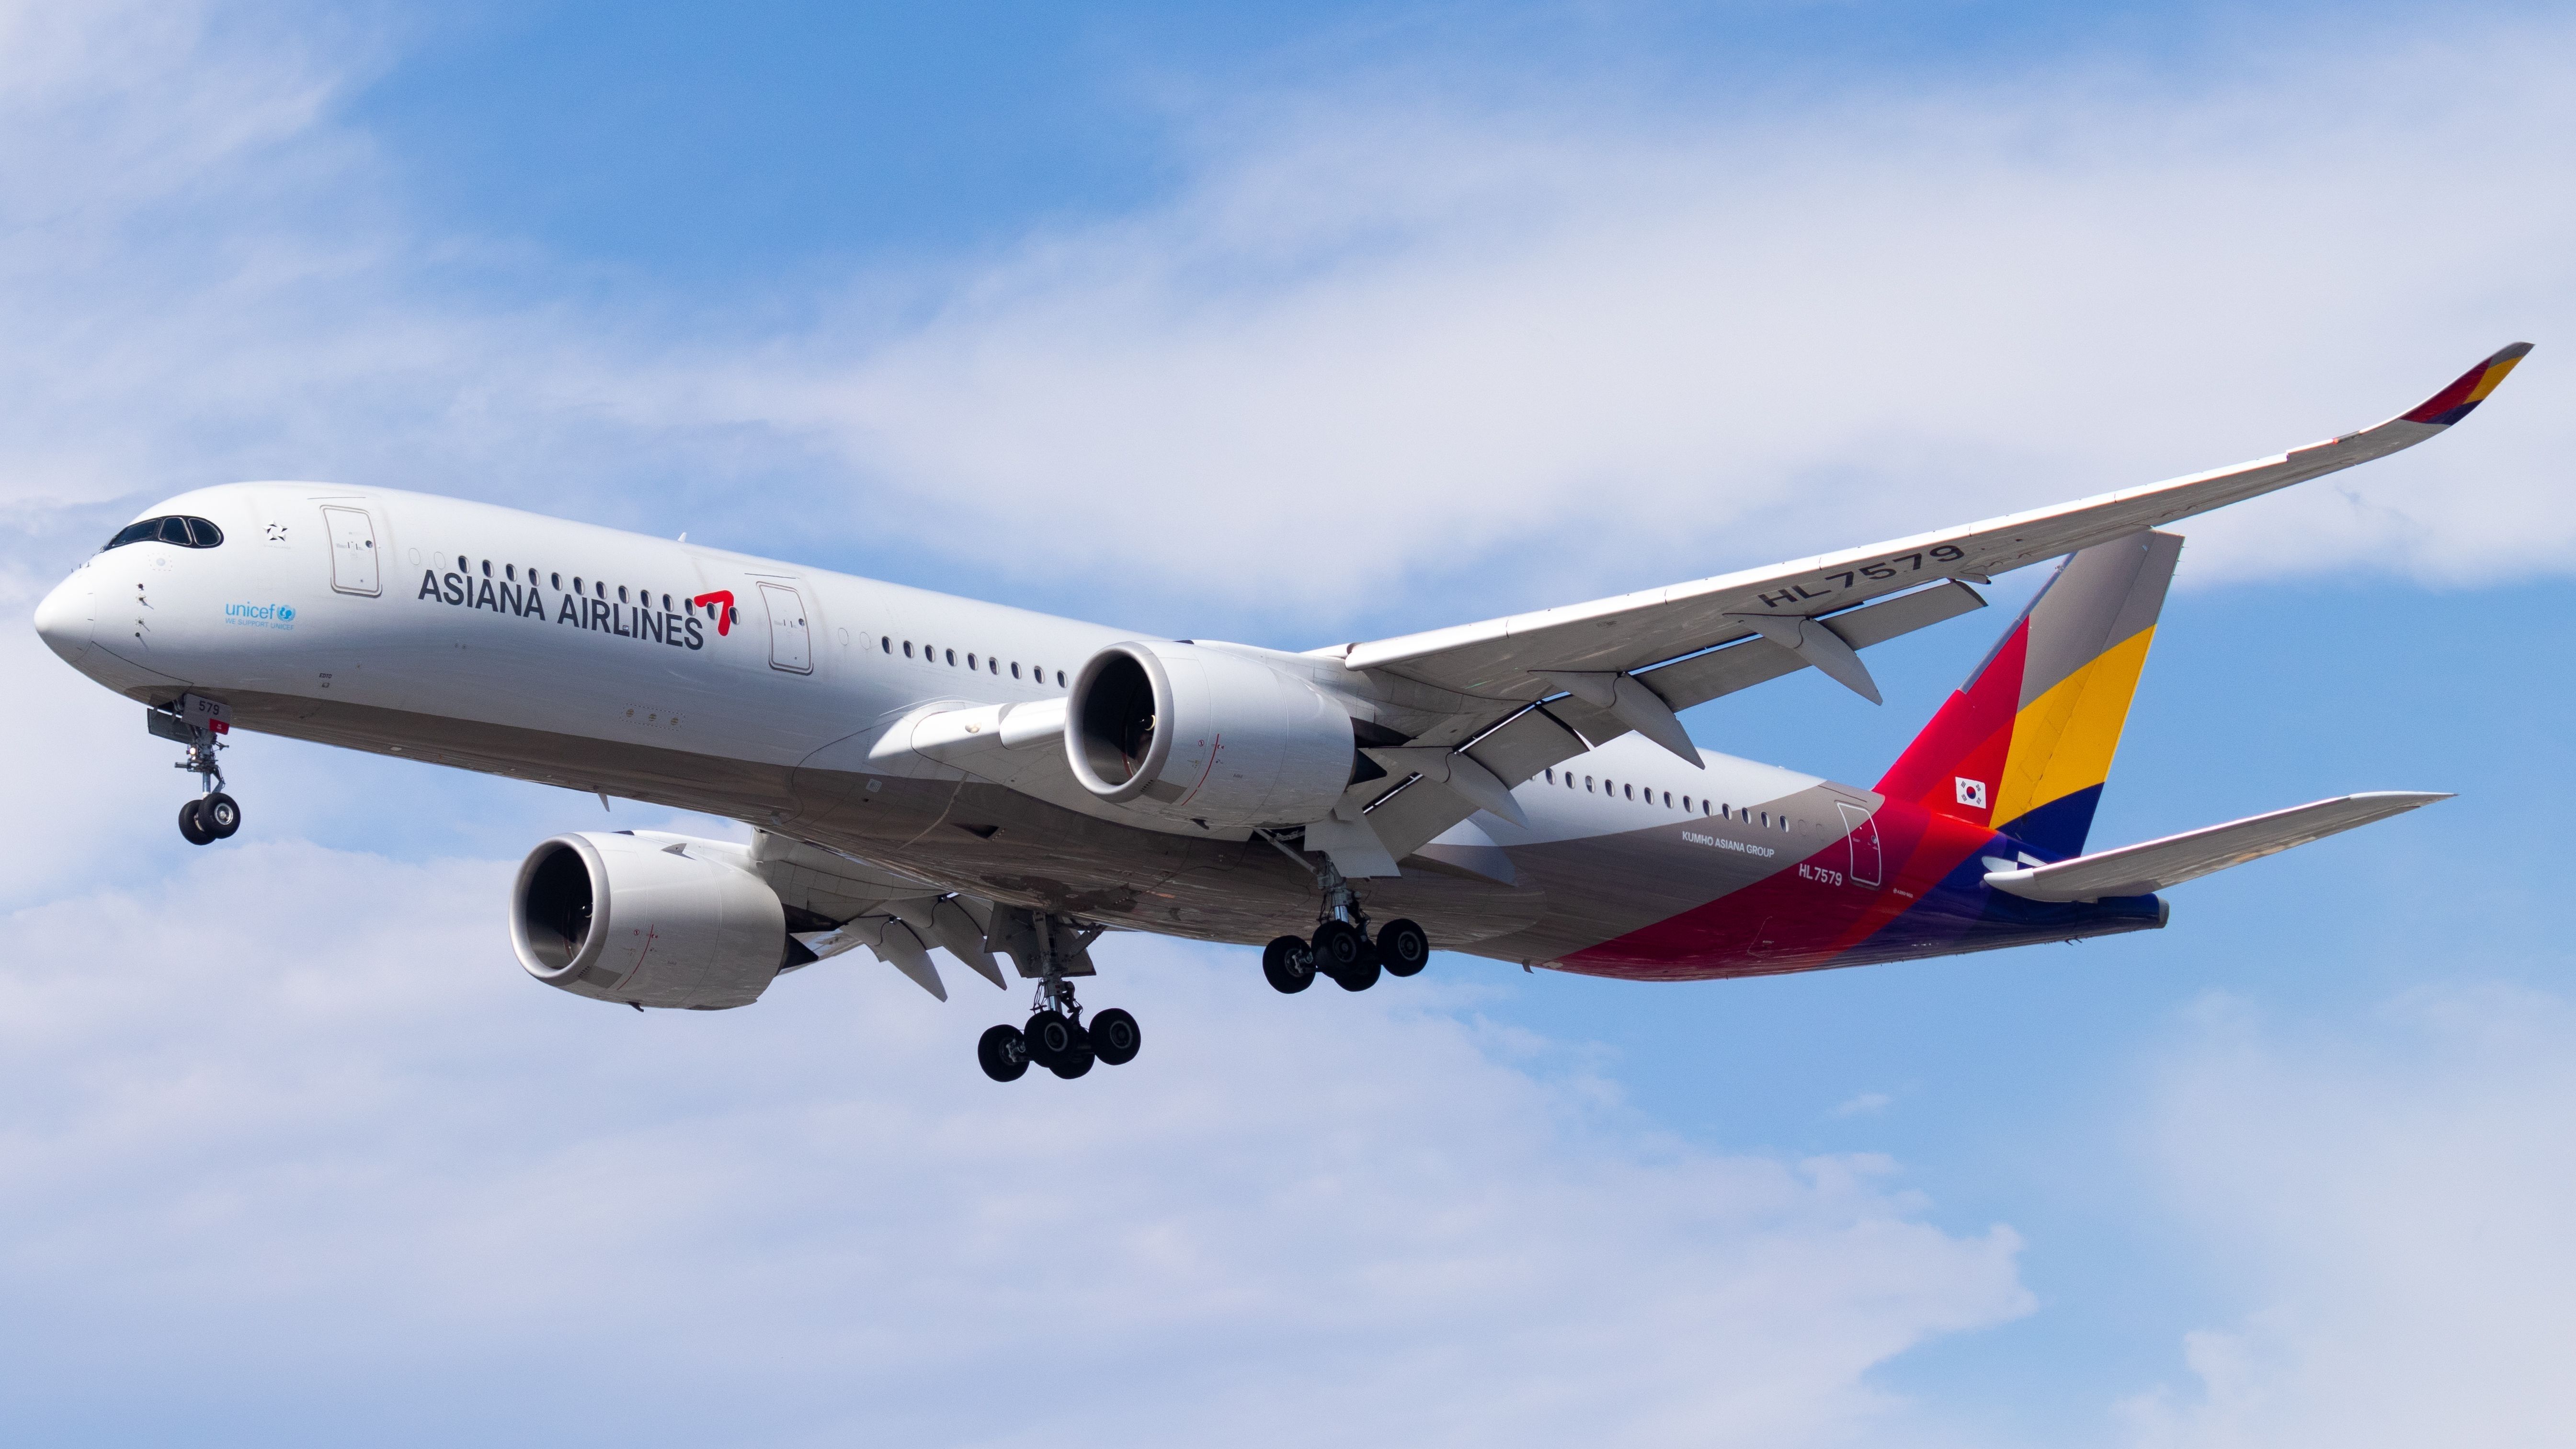 Asiana Airlines Airbus A350-900 landing at Los Angeles International Airport LAX